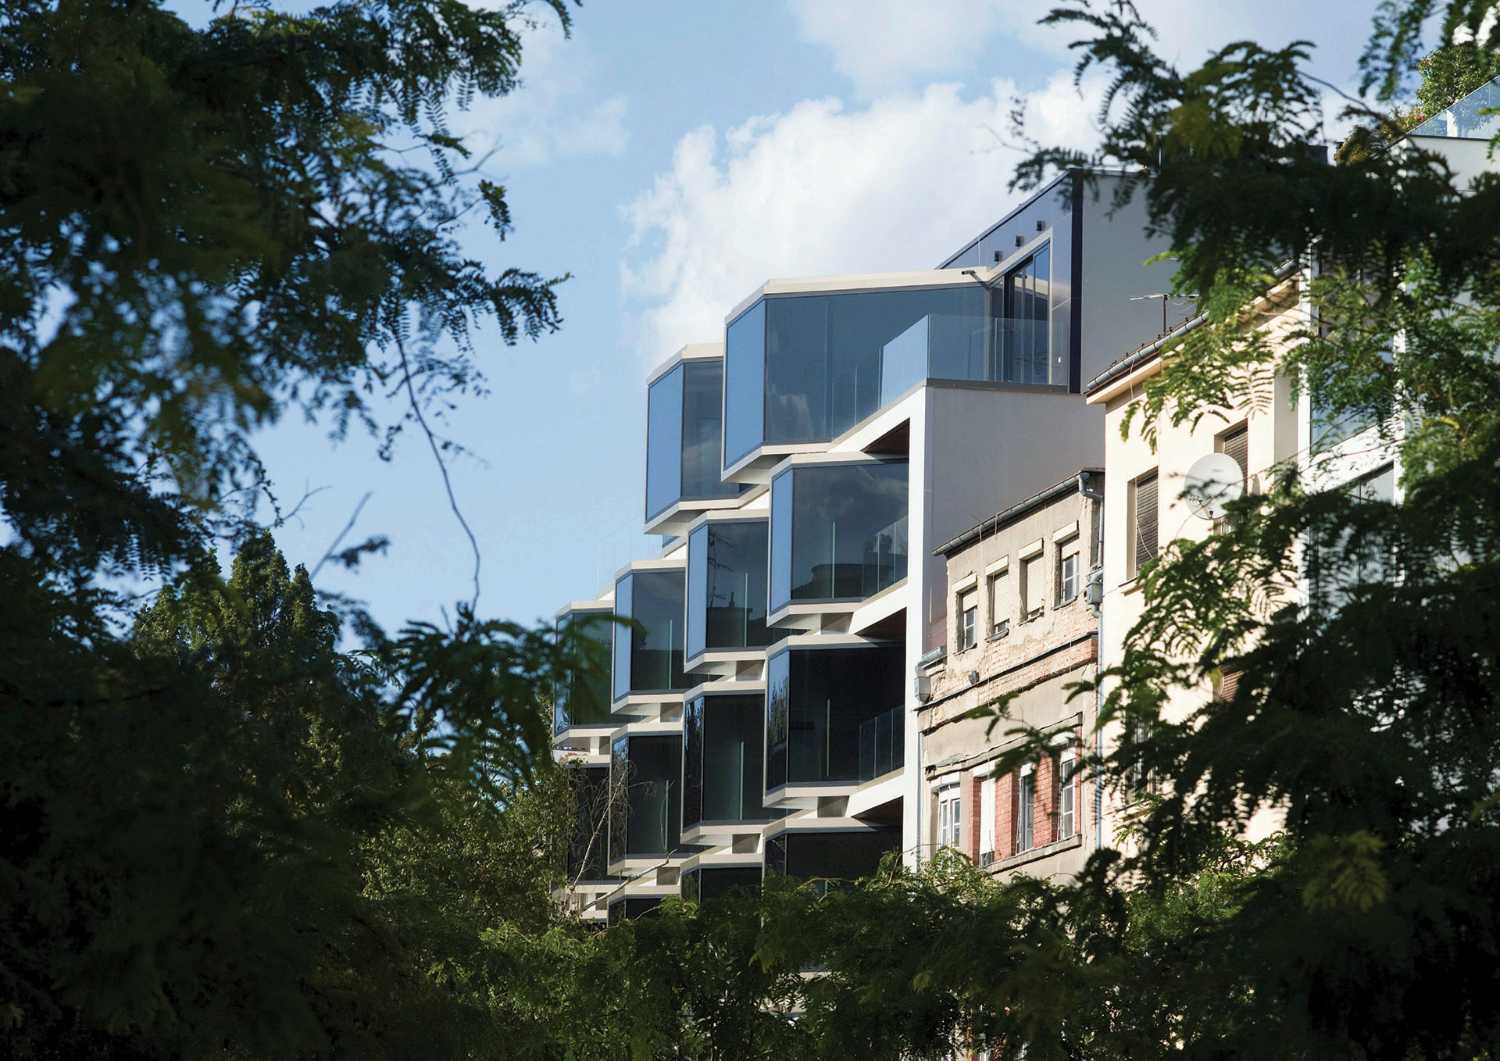 Three-dimensionality and play of volumes on the facade. The residential building Interpolation B